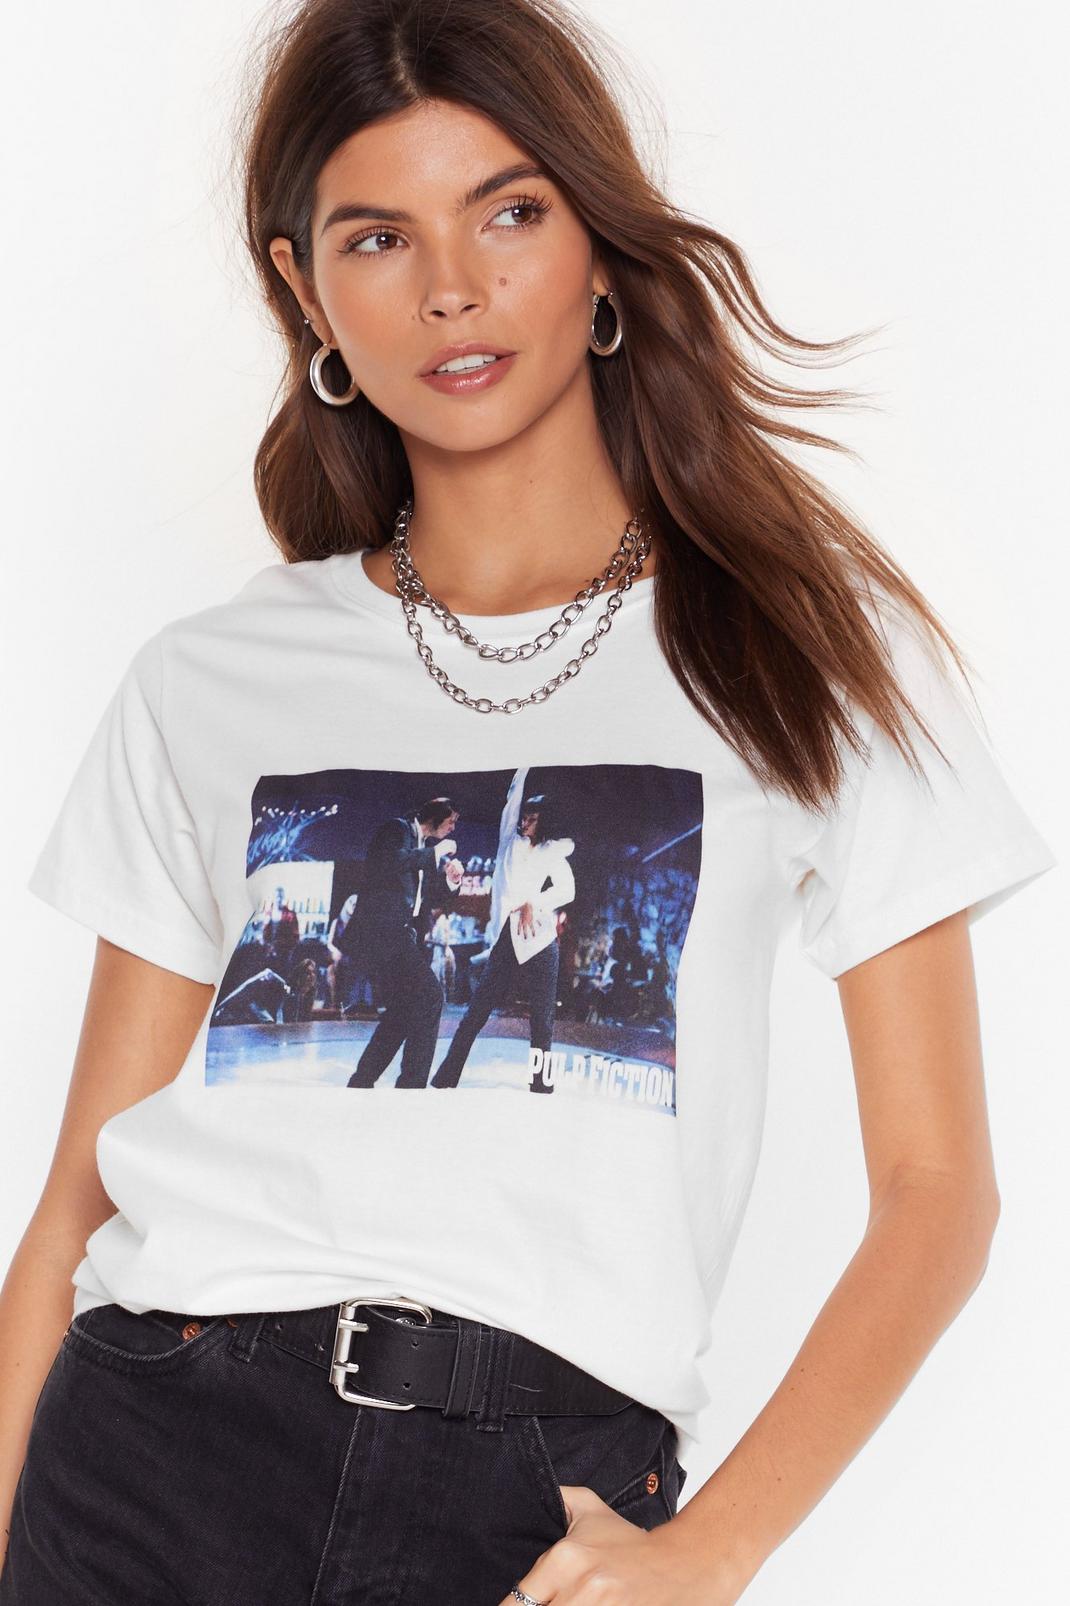 Dance The Twist Pulp Fiction Graphic T-Shirt image number 1